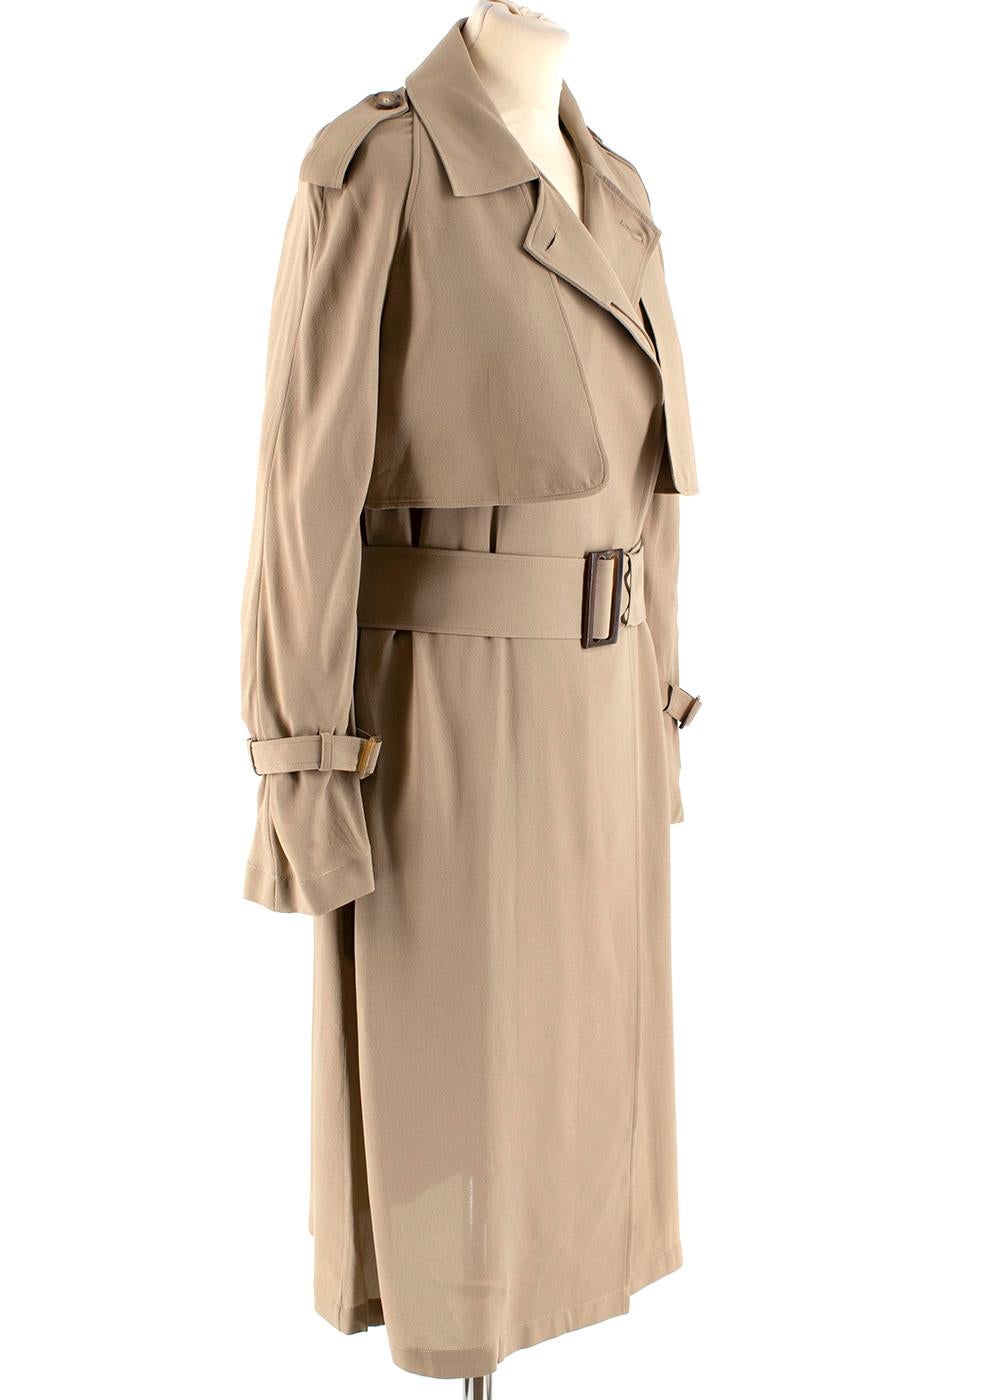  Michael Kors Tan Trench Duster Coat - Size US 0 For Sale 2